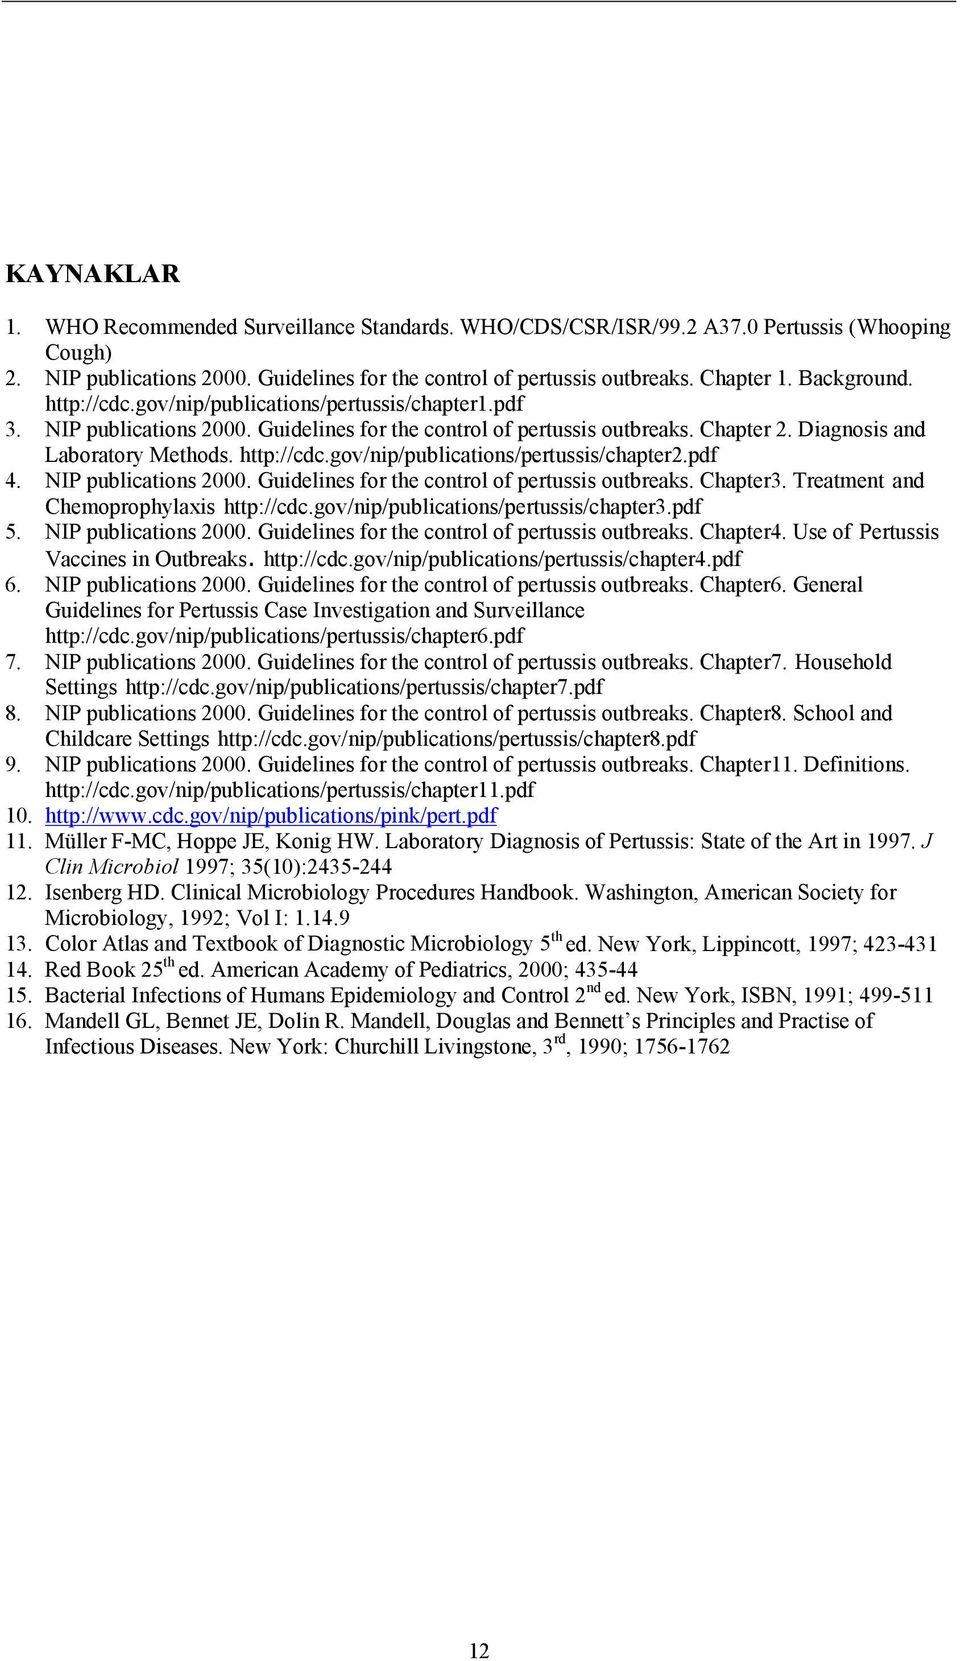 pdf 4. NIP publications 2000. Guidelines for the control of pertussis outbreaks. Chapter3. Treatment and Chemoprophylaxis http://cdc.gov/nip/publications/pertussis/chapter3.pdf 5.